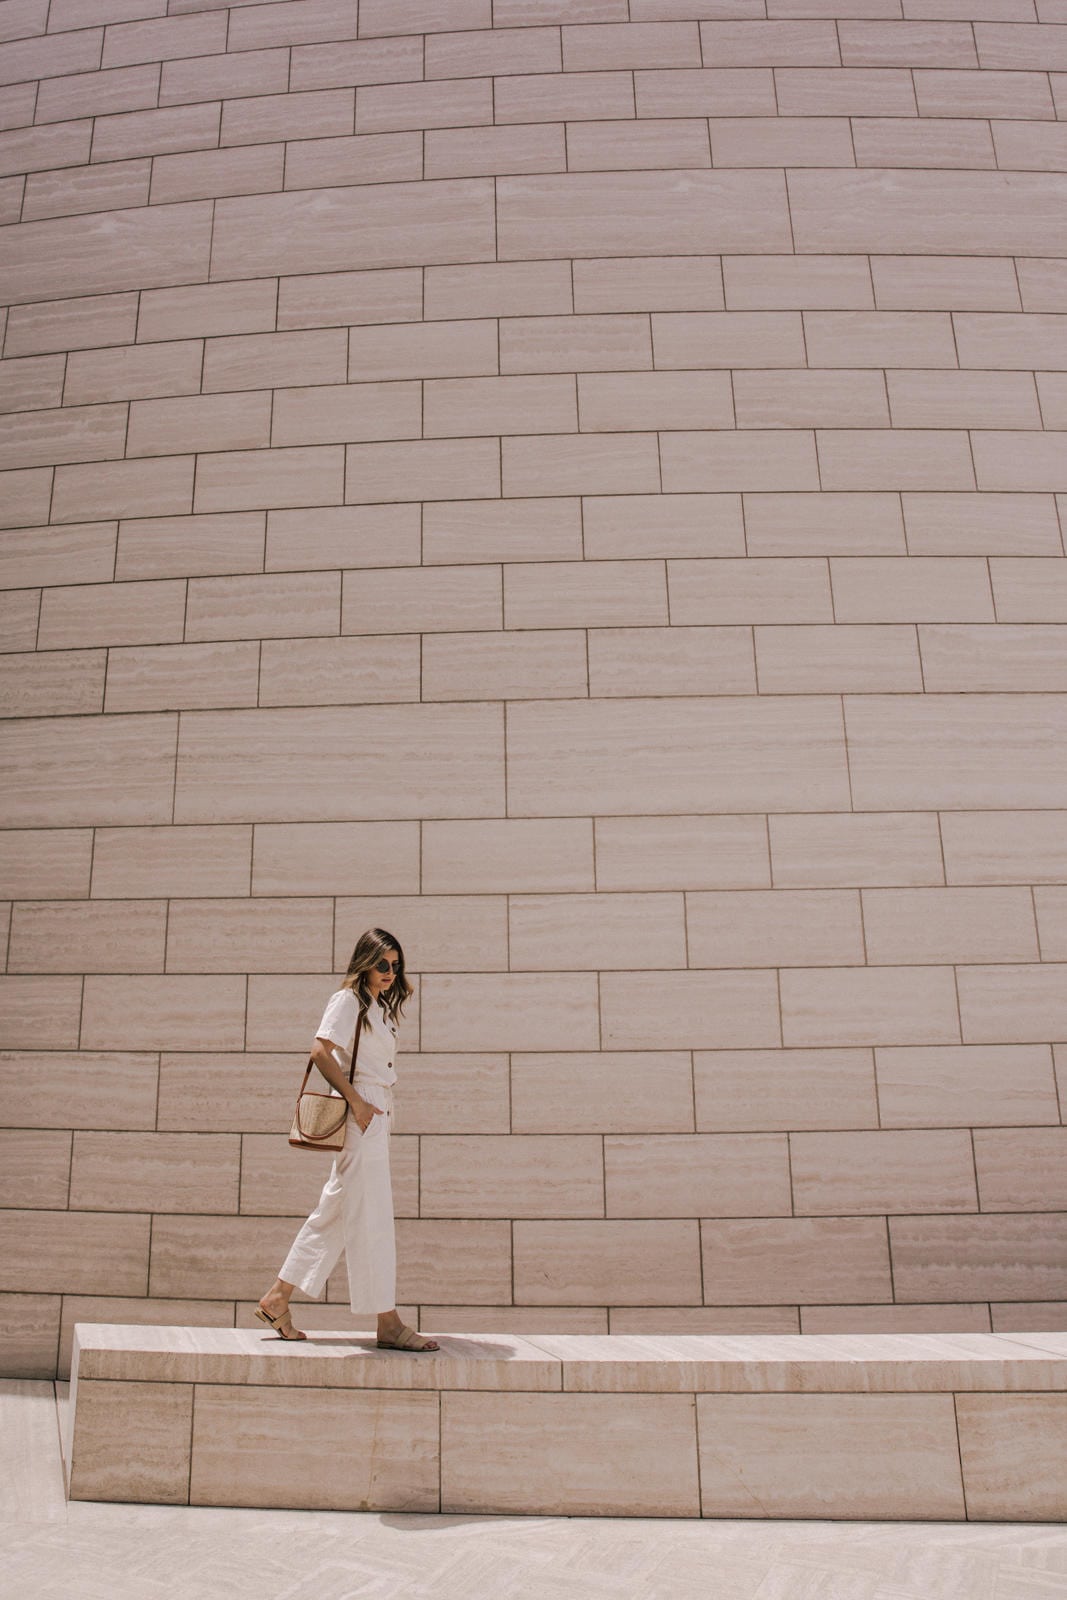 Pam Hetlinger Outfits, Sezane Jumpsuit, Slide Sandals, Straw Bag, July 4 Outfit | TheGirlFromPanama.com | 5 July 4 Outfits You'll Want to Wear All Summer Long by Pam Hetlinger